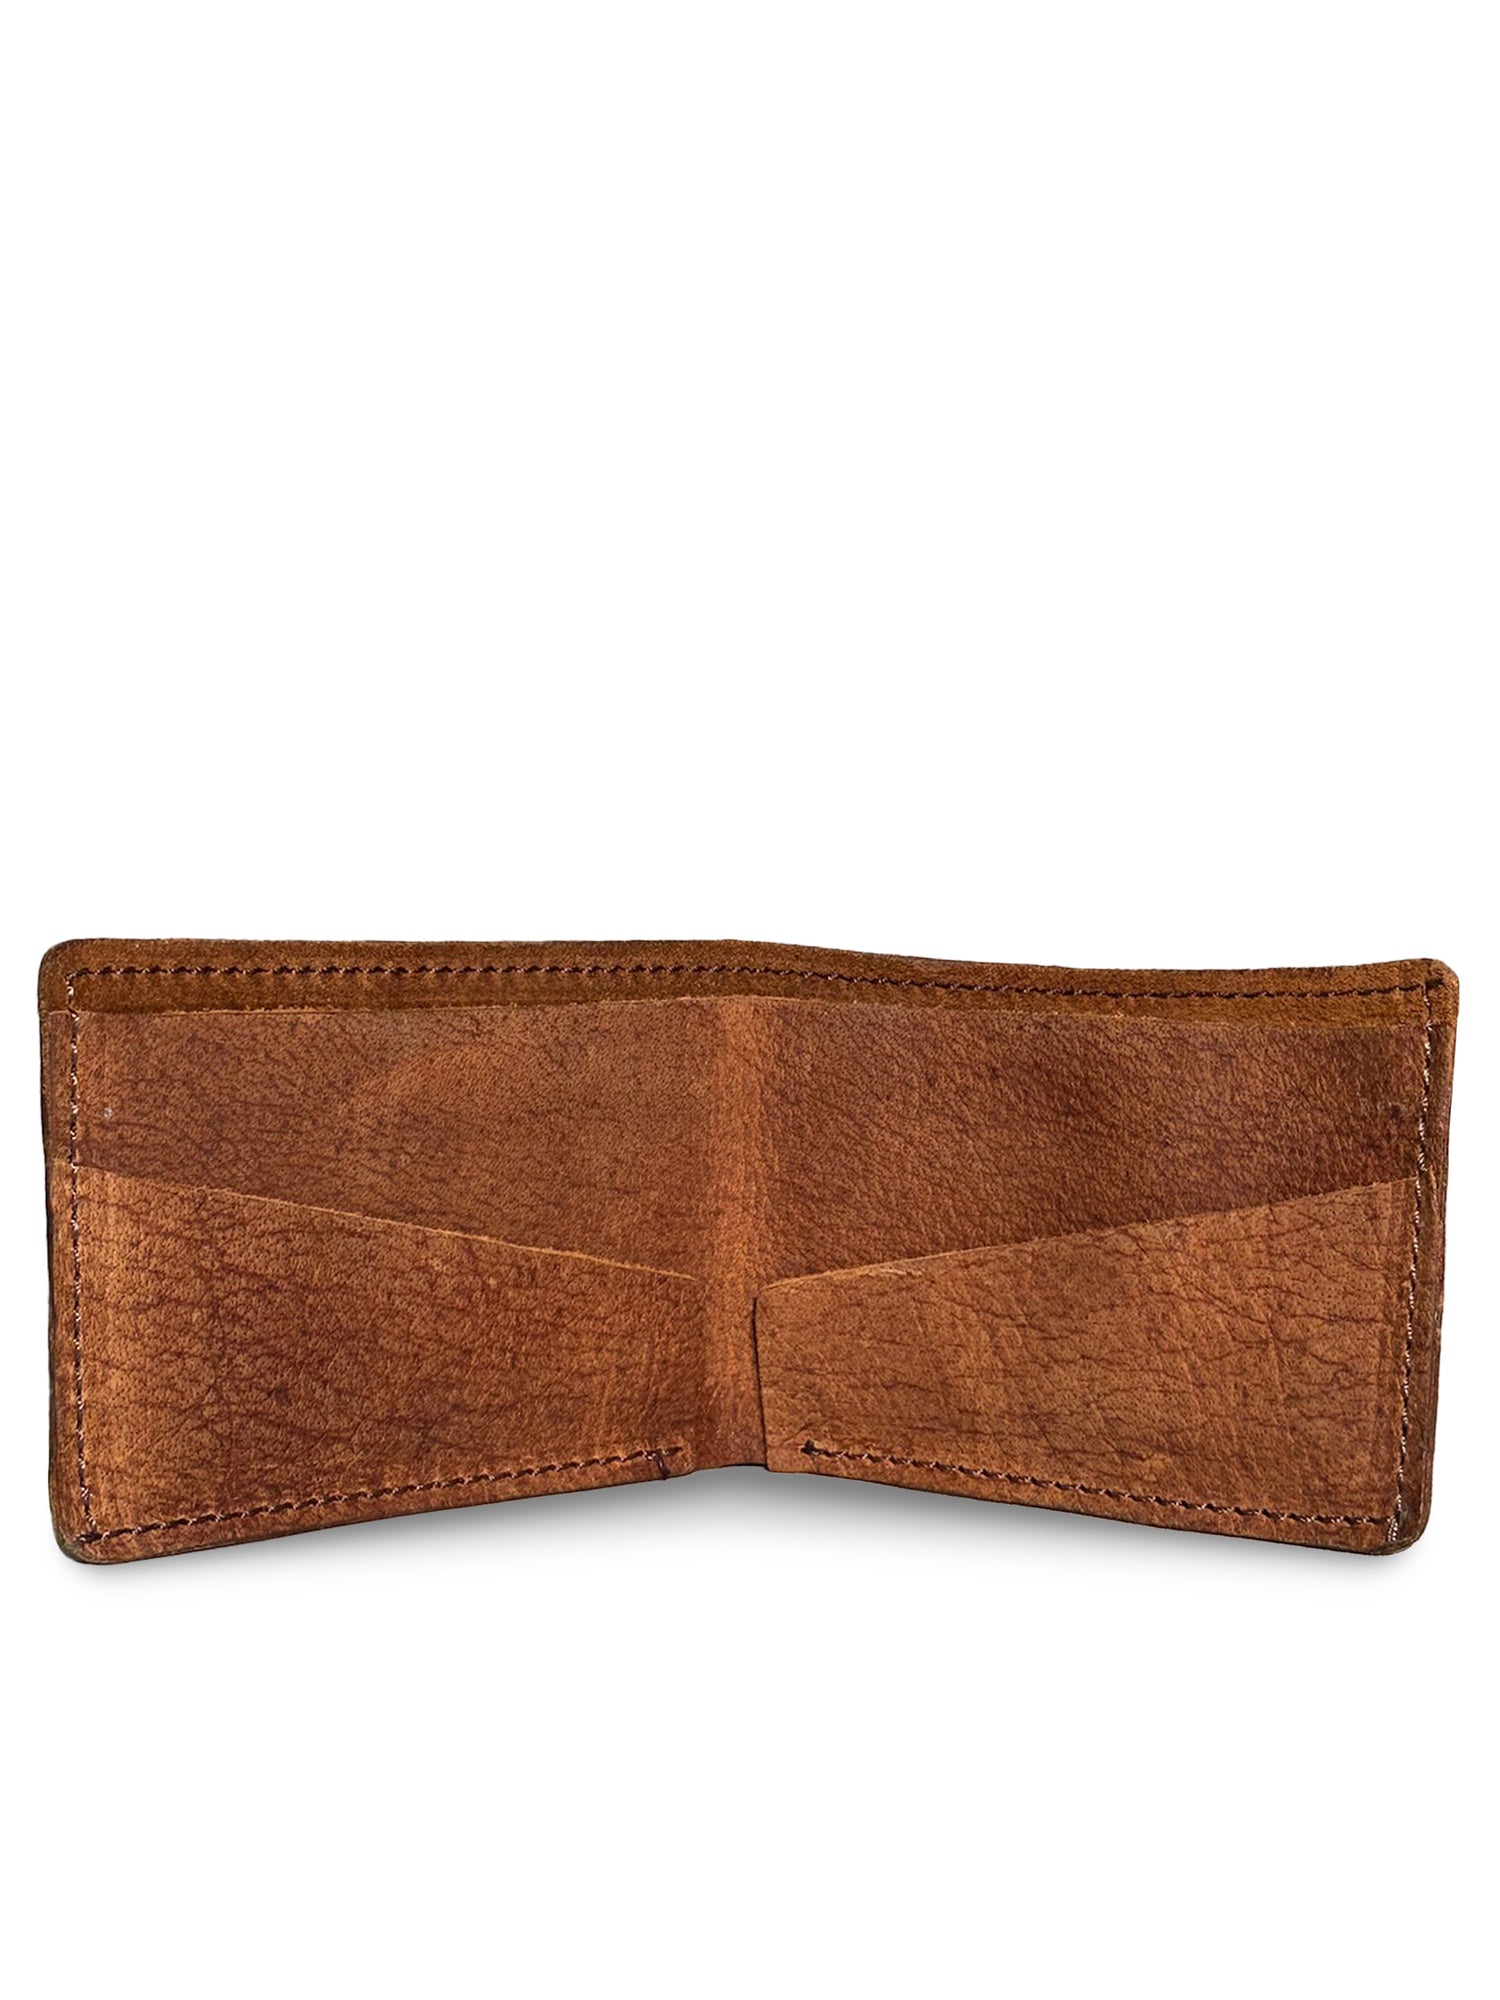 Special Edition Bi-fold Wallet in Rawhide Brown - Limited Run